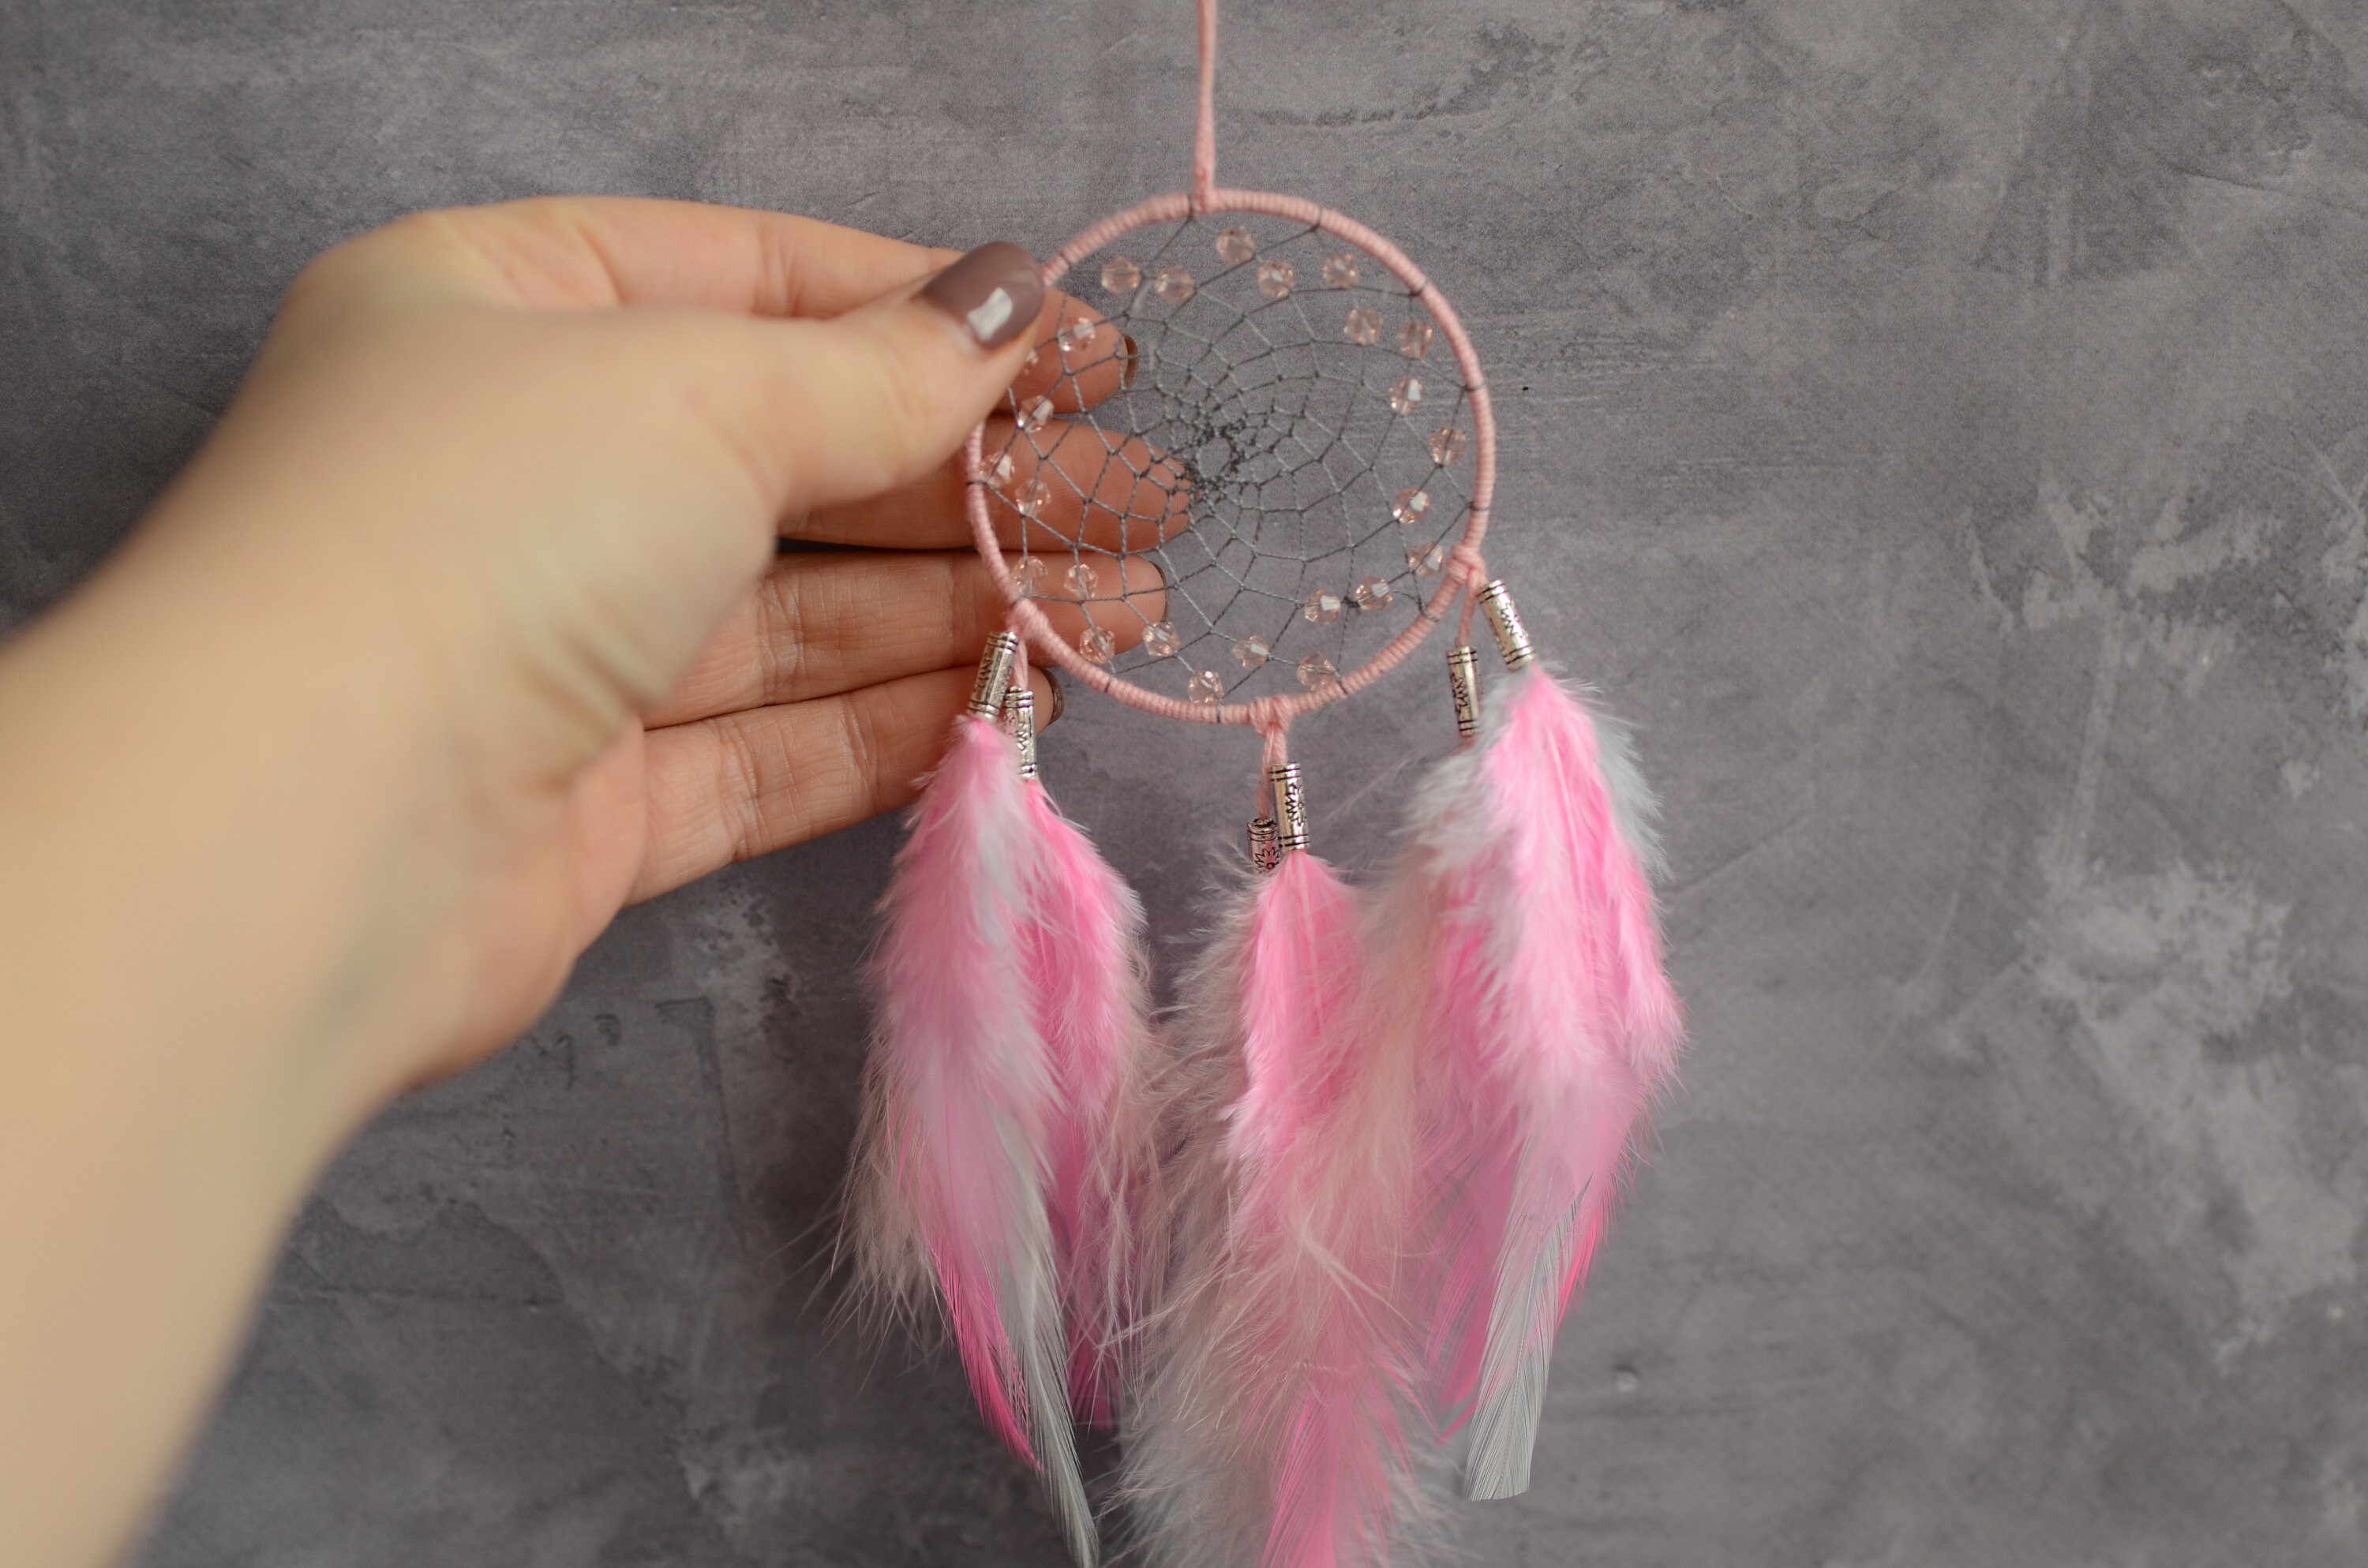 DULI Love Couple Car Hanging Dreamcatcher with Pink & Purple Feathers for Home  Decor Car Decoration